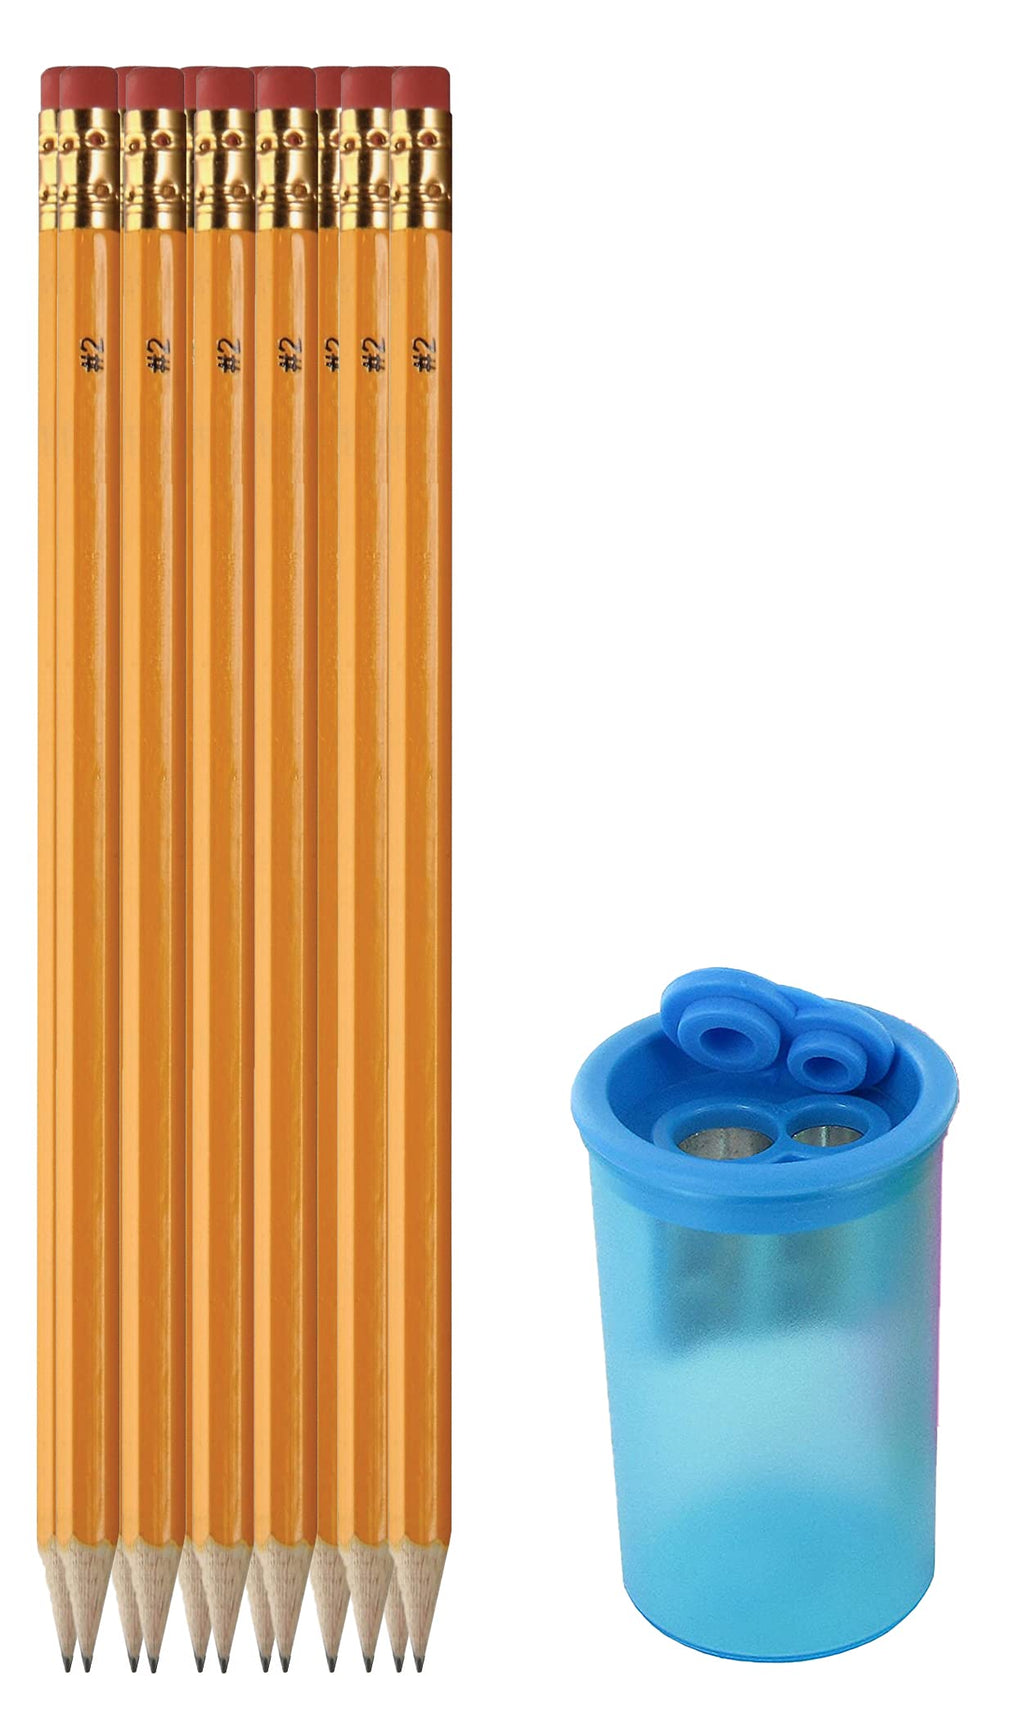  [AUSTRALIA] - #2 Pencils, Pre-Sharpened Wood-Cased #2 HB Pencils, Box of 12, Yellow, Includes 1 Pencil Sharpener, Plastic Can 2-Hole Inner Sharpener, Fun Colors (May Vary)